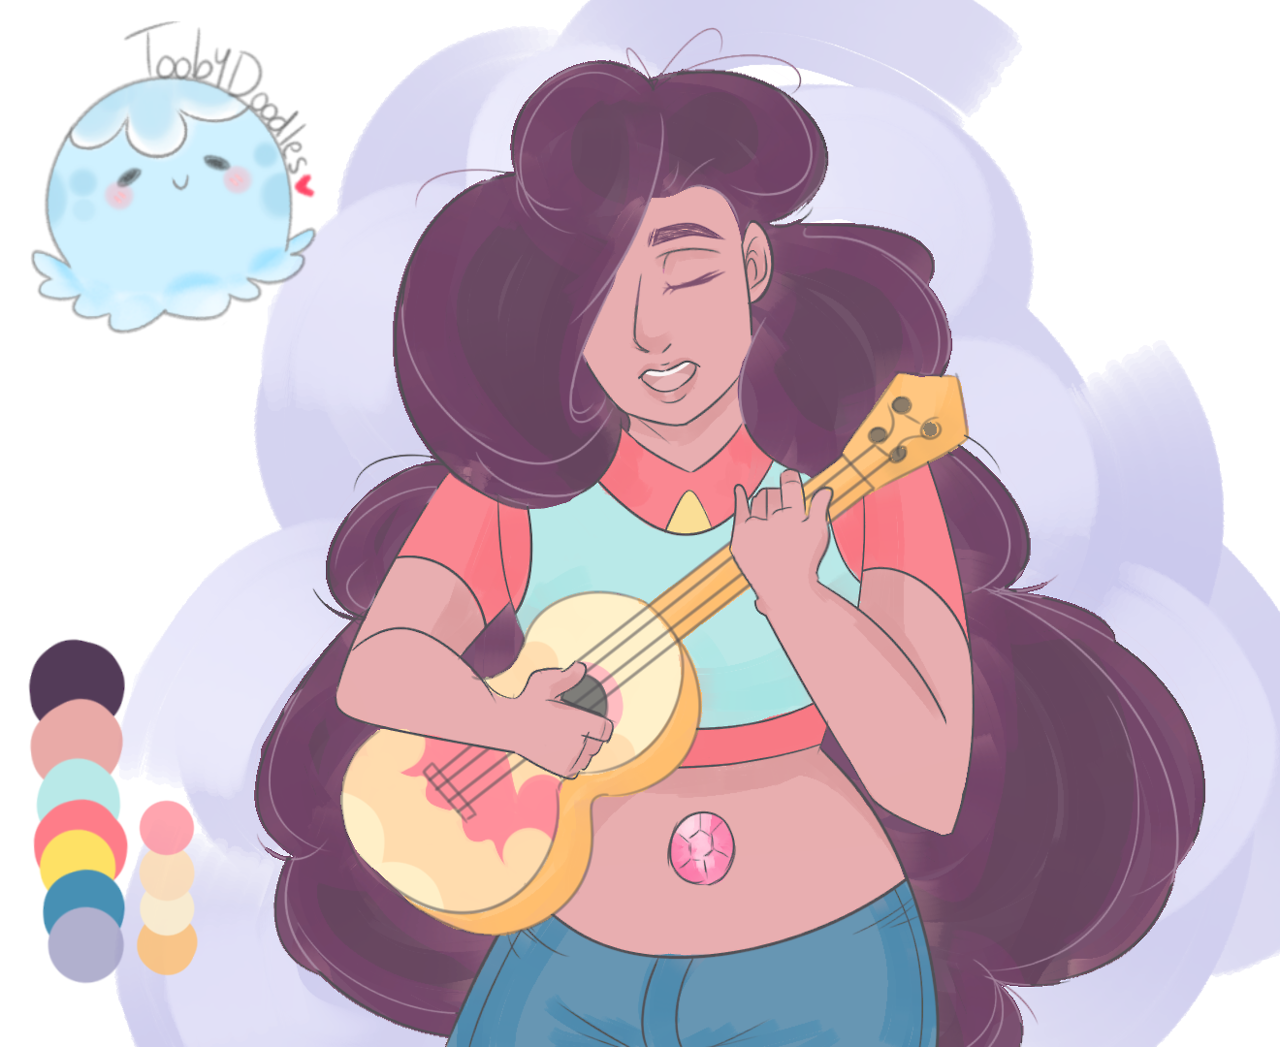 Stevonnie jamming I drew one of my favorite fusions, although I love all of them! One super sparkly and one regular ol’ Stevonnie. - Tooby =w=